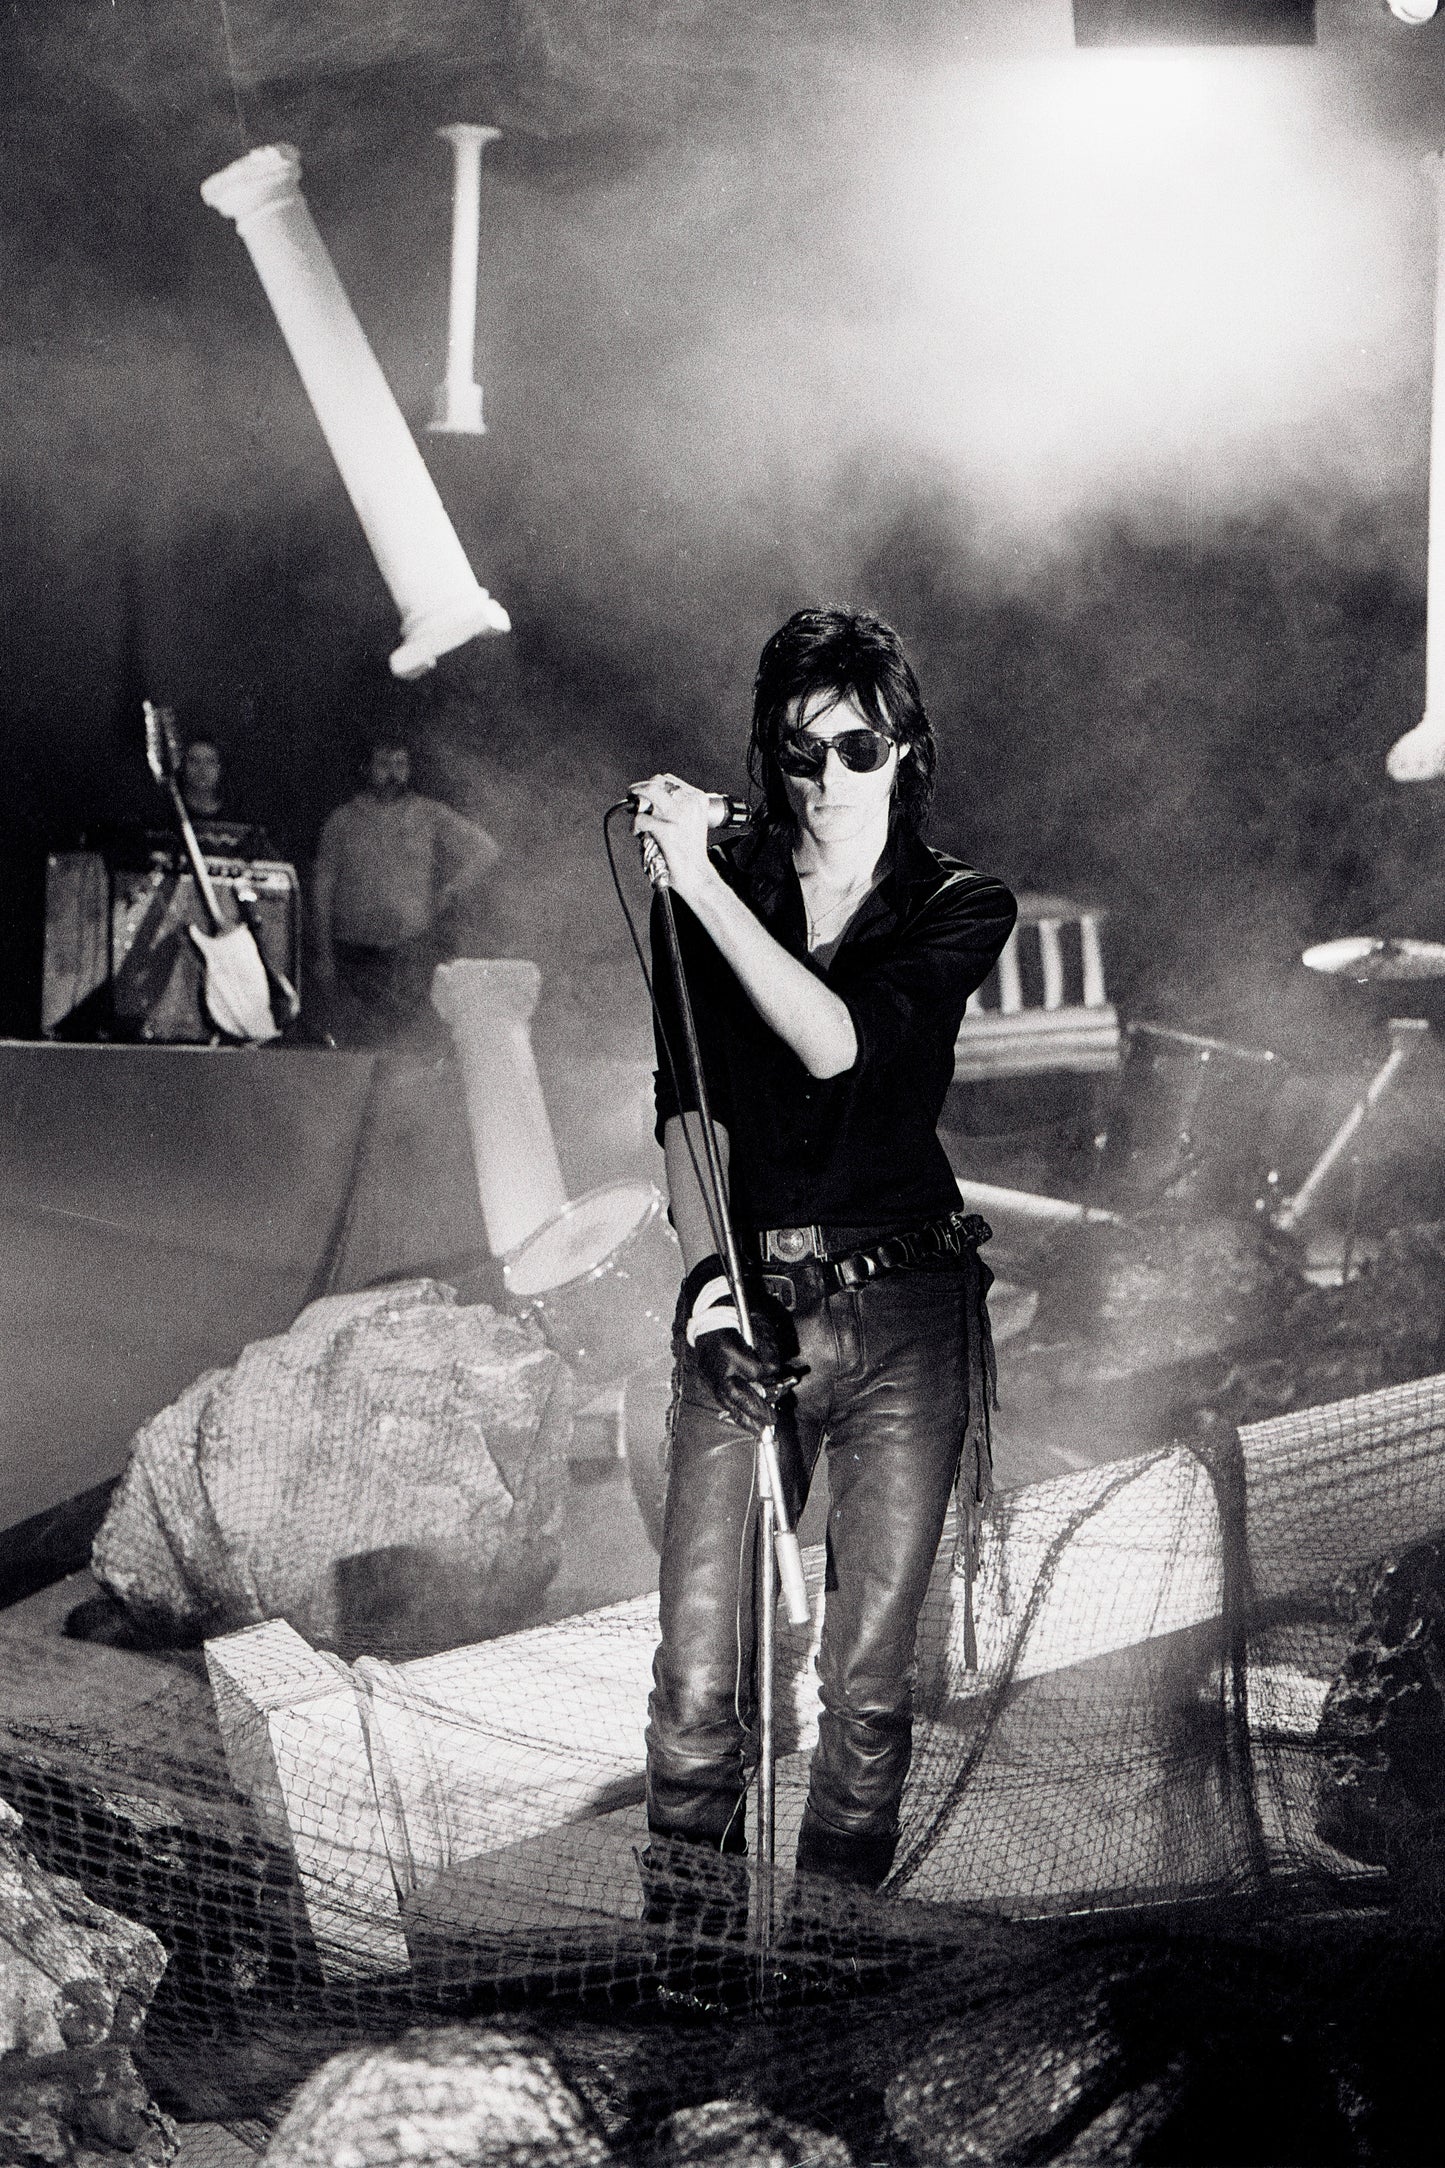 Steve Rapport "Andrew Eldritch of Sisters of Mercy #2" (1984)